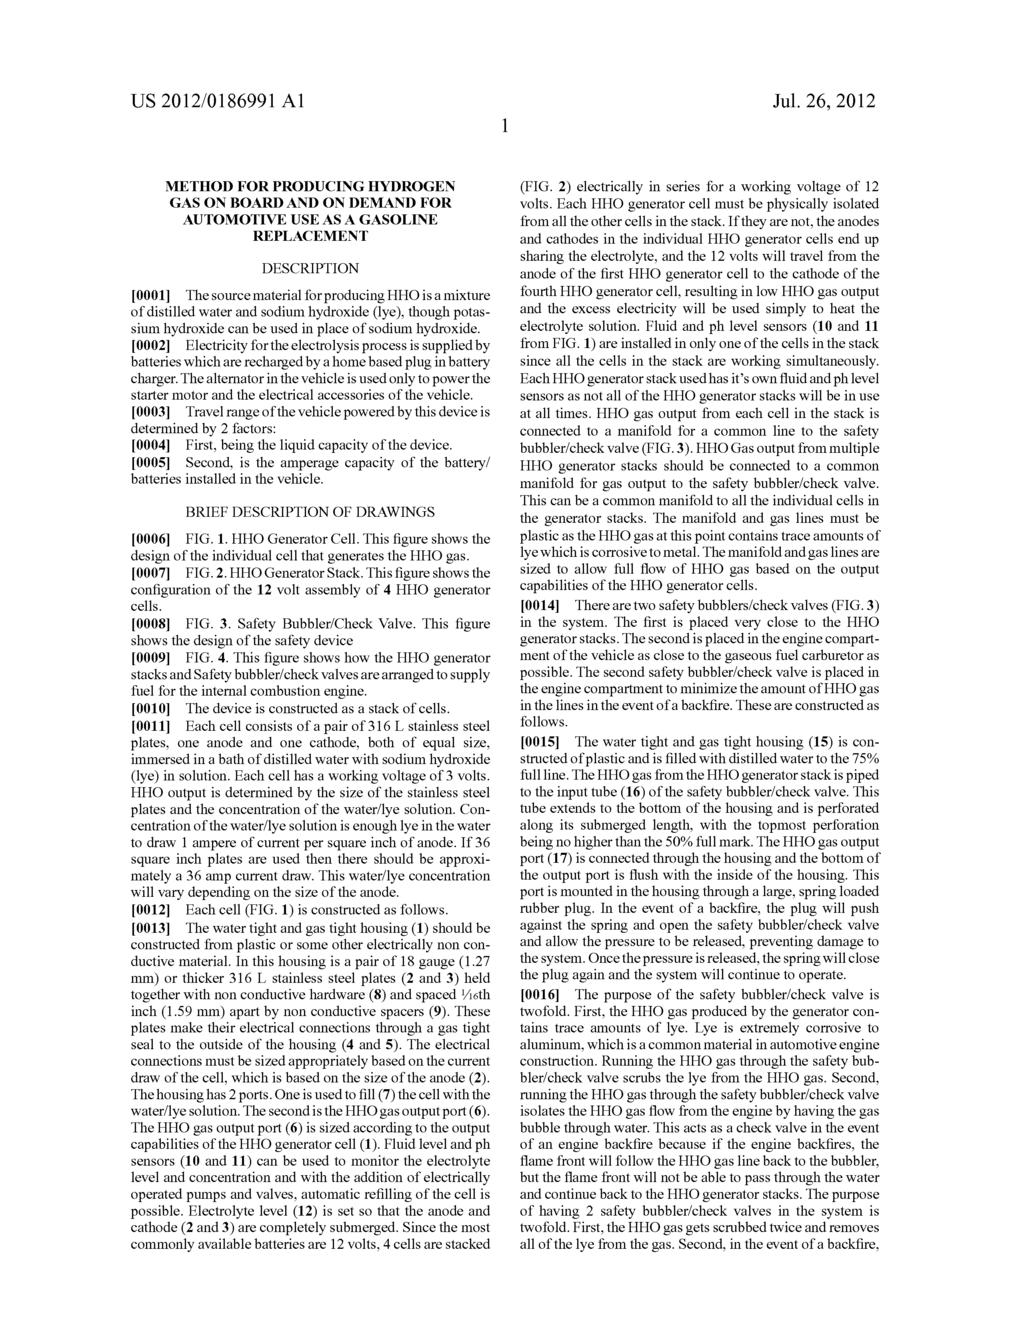 US 2012/01 86991 A1 Jul. 26, 2012 METHOD FOR PRODUCING HYDROGEN GAS ON BOARD AND ON DEMAND FOR AUTOMOTIVE USE ASA GASOLINE REPLACEMENT DESCRIPTION 0001.